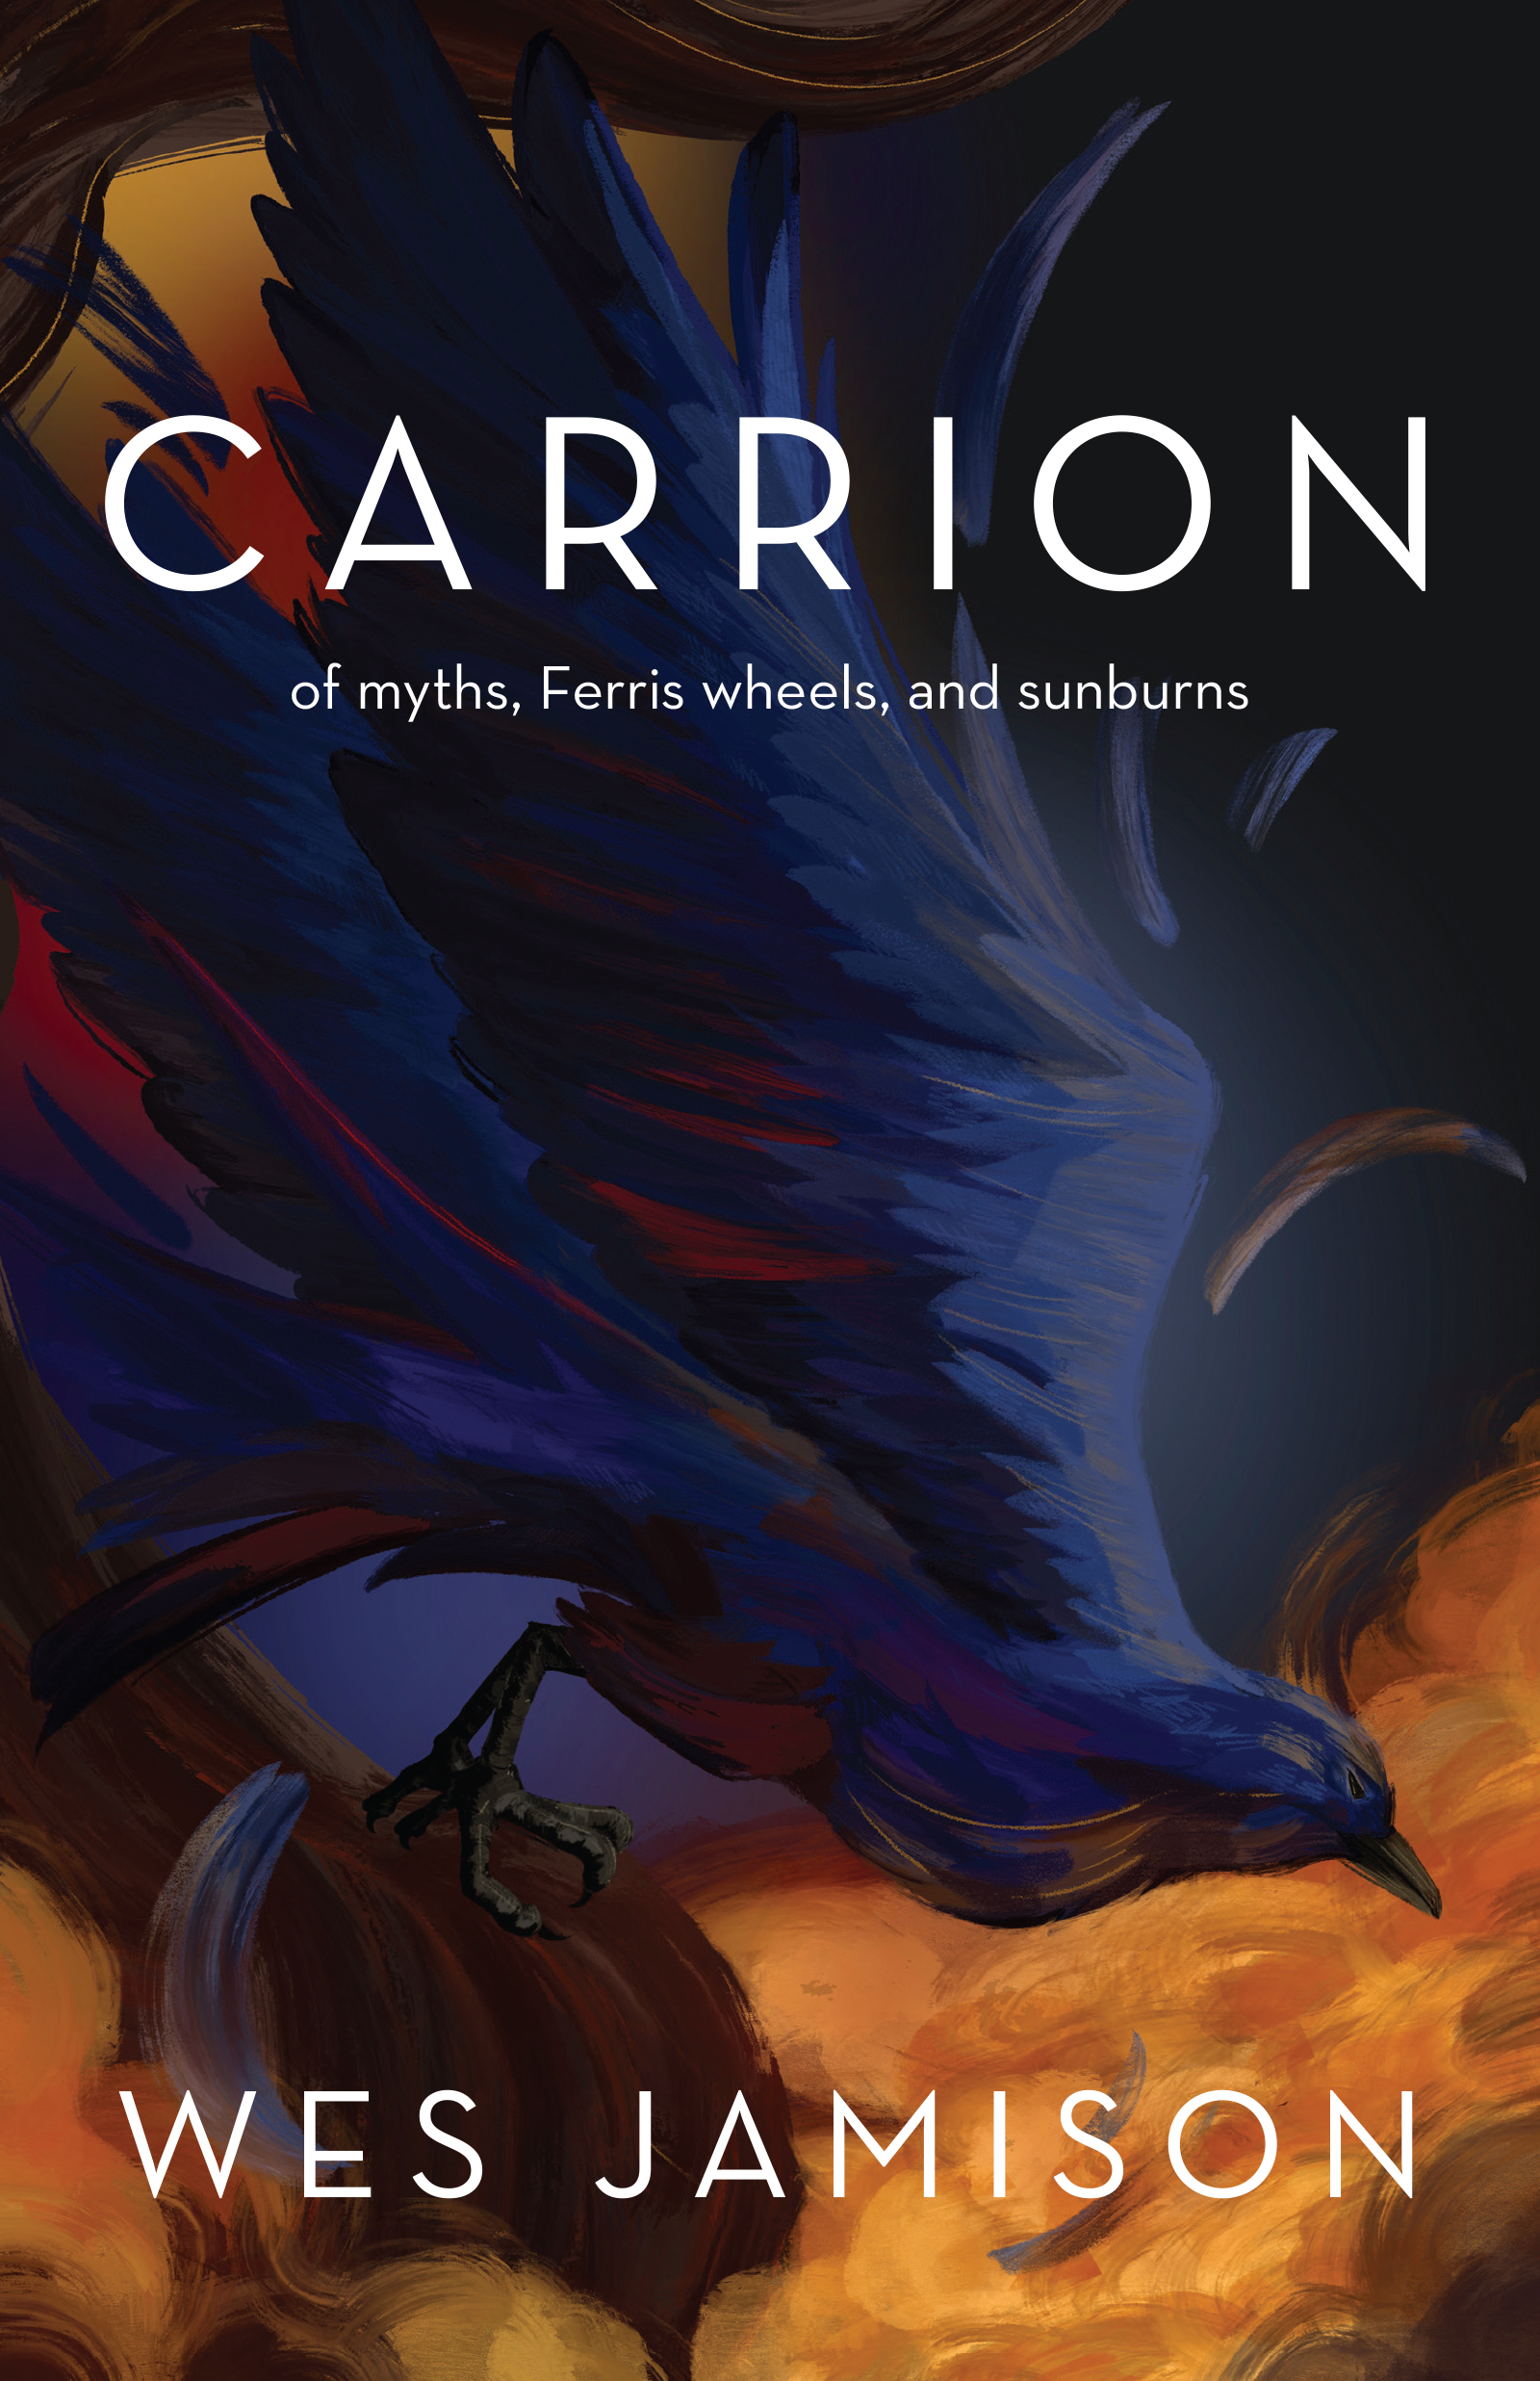 A painting of a dark ravel descending against a background of flames, with white text reading "CARRION: Of myths, Ferris wheels, and sunburns by Wes Jamison"